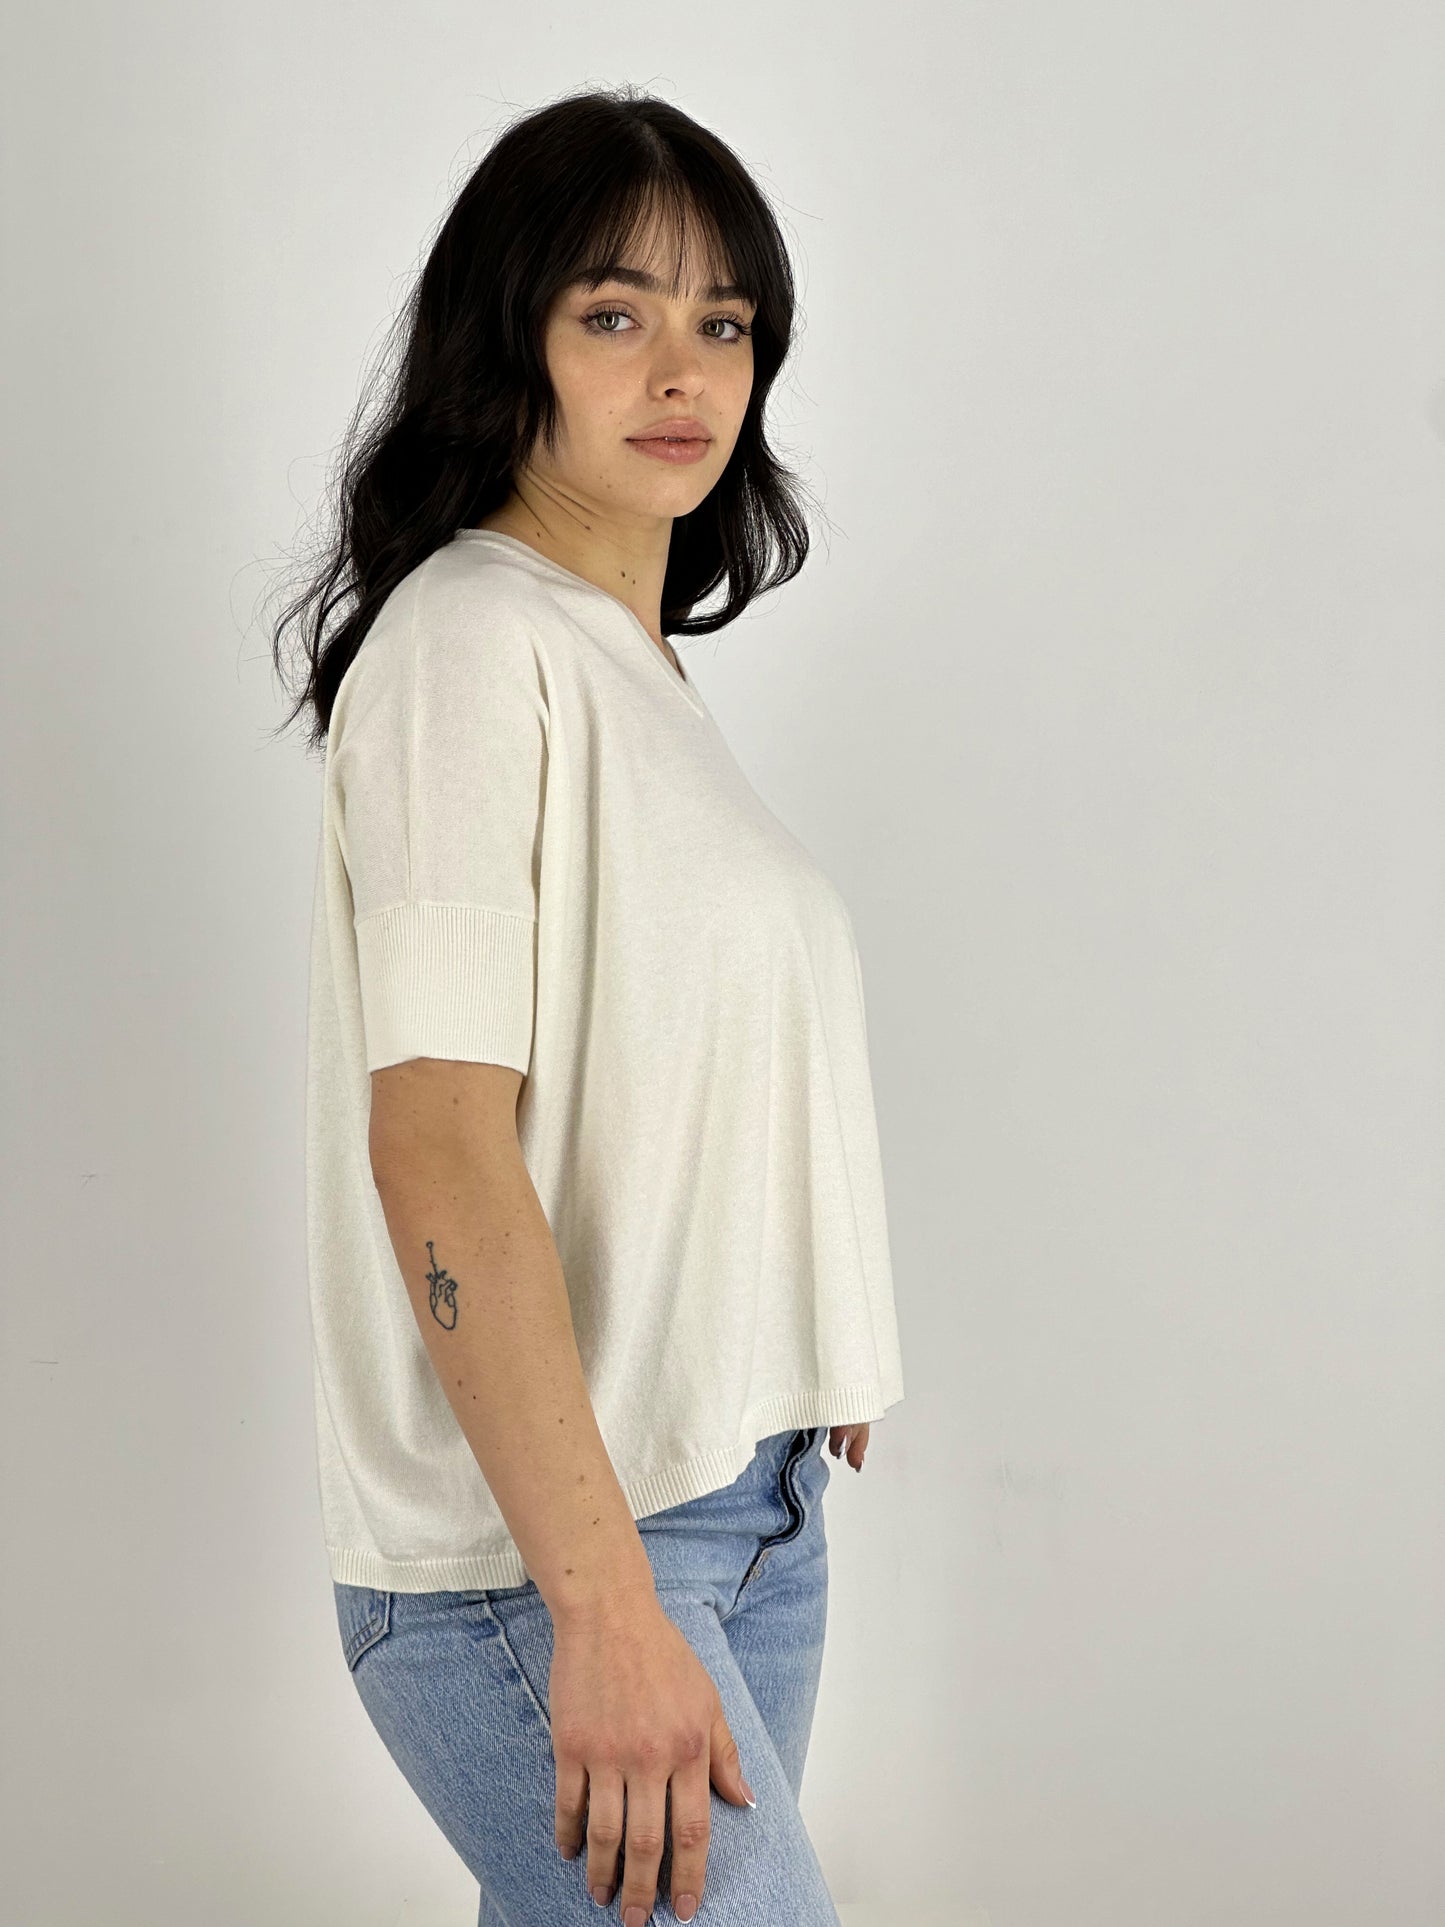 Cotton - Silk - Cashmere V-Neck Top with Half Sleeves